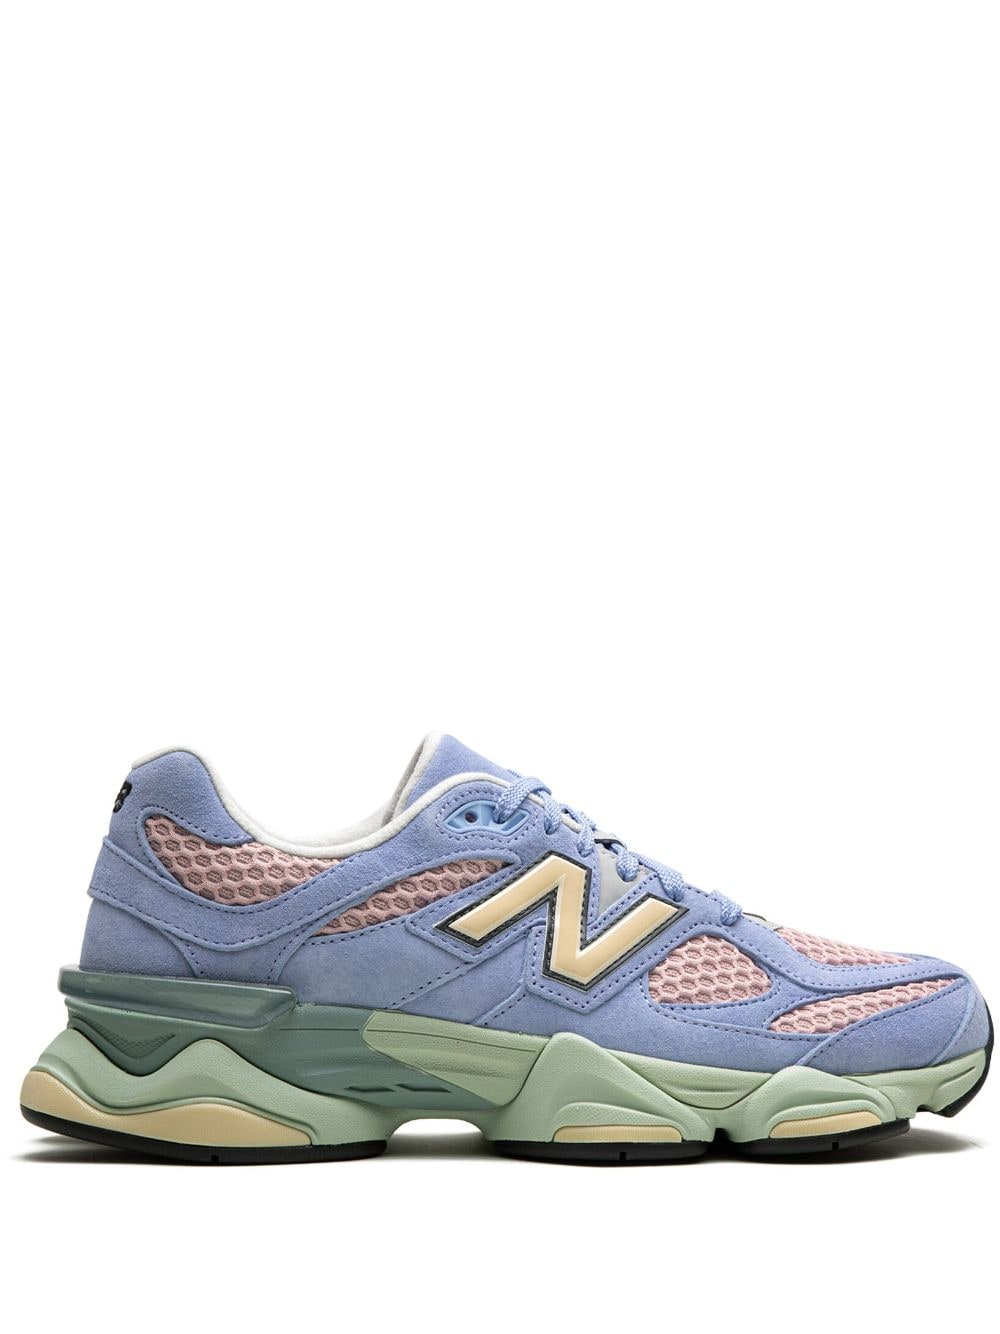 New Balance 90/60 "The Whitaker Group - Missing Pieces - Daydream Blue" sneakers - Purple